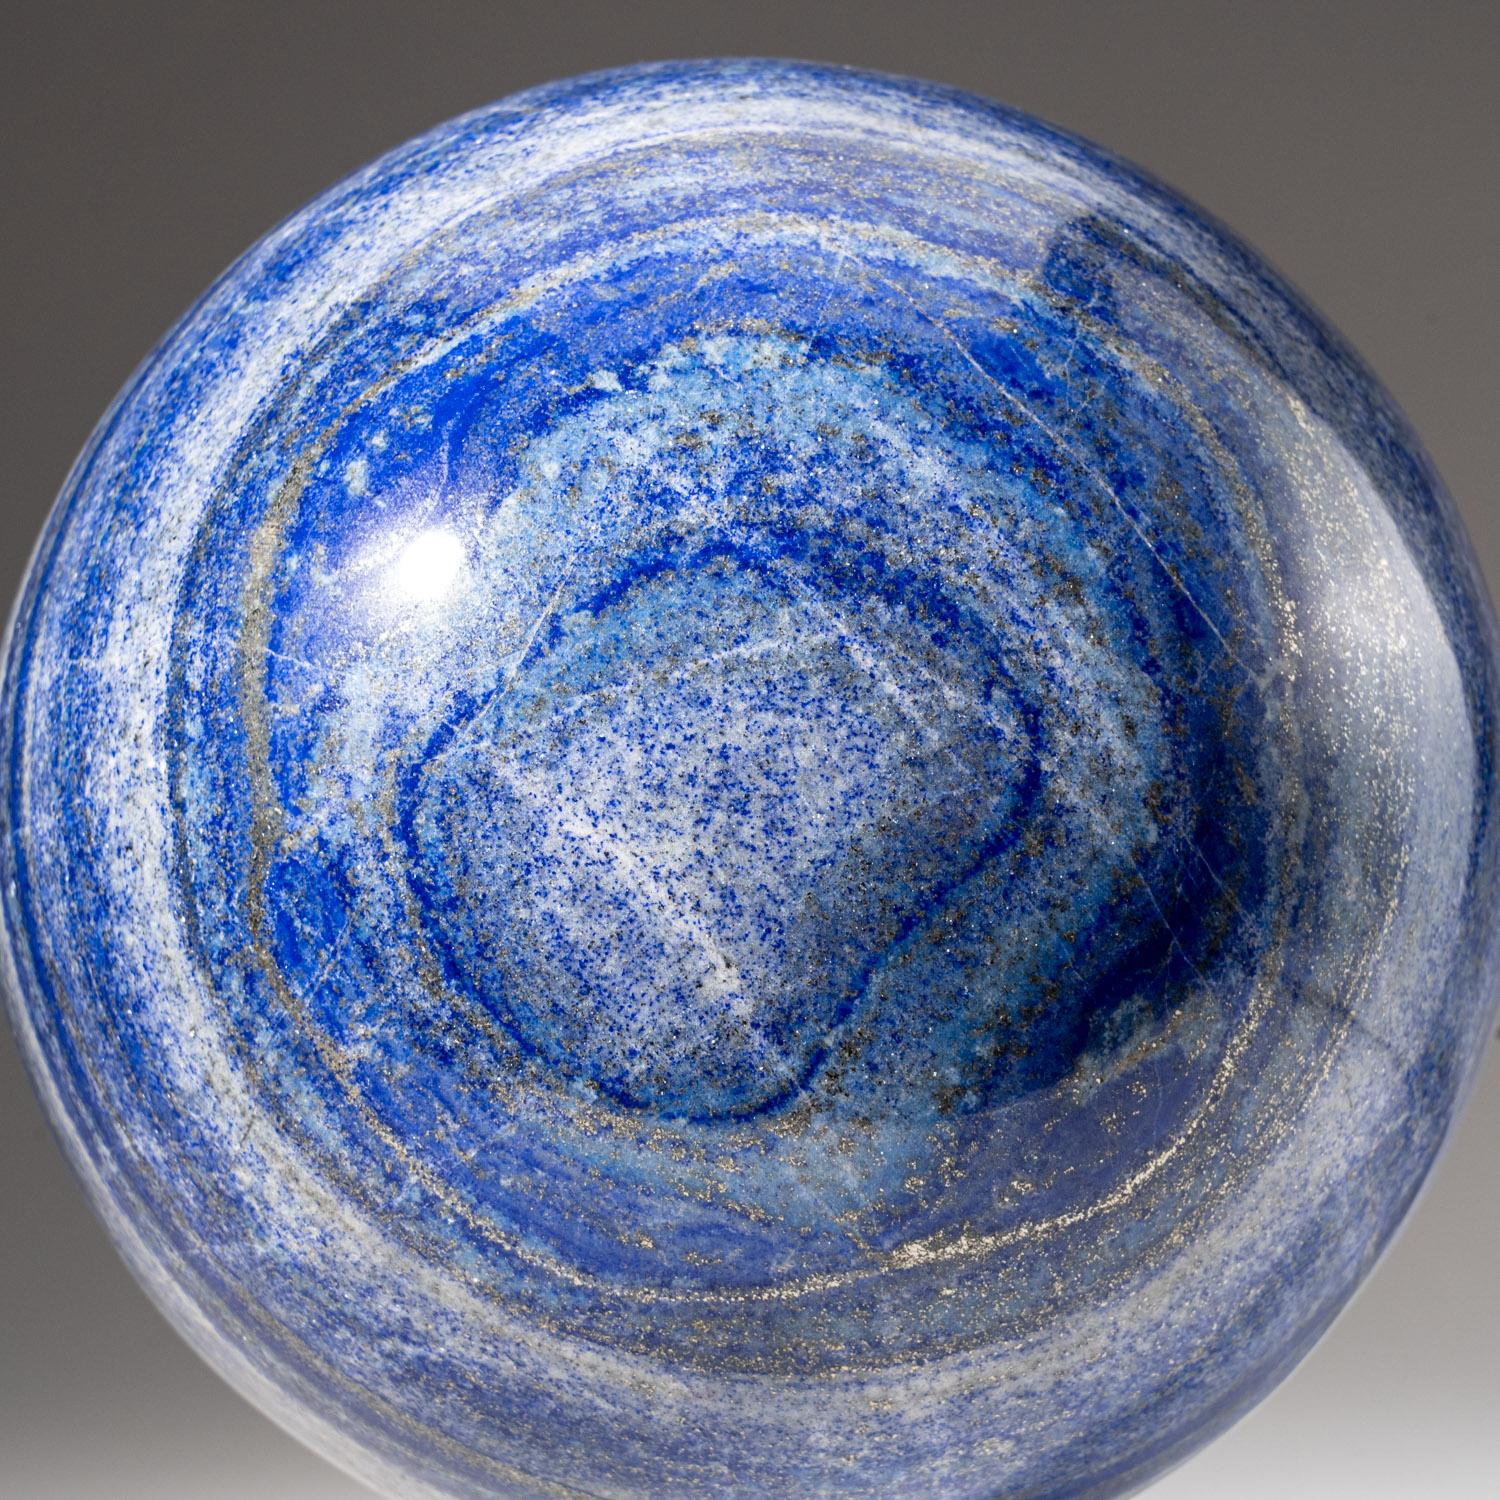 This top-quality, Lapis Lazuli sphere from Afghanistan, has been beautifully hand-polished for maximum aesthetic appeal. The solid piece of natural stone boasts a vibrant, ultra-royal blue hue, complemented by glimmering pyrite microcrystals. Lapis